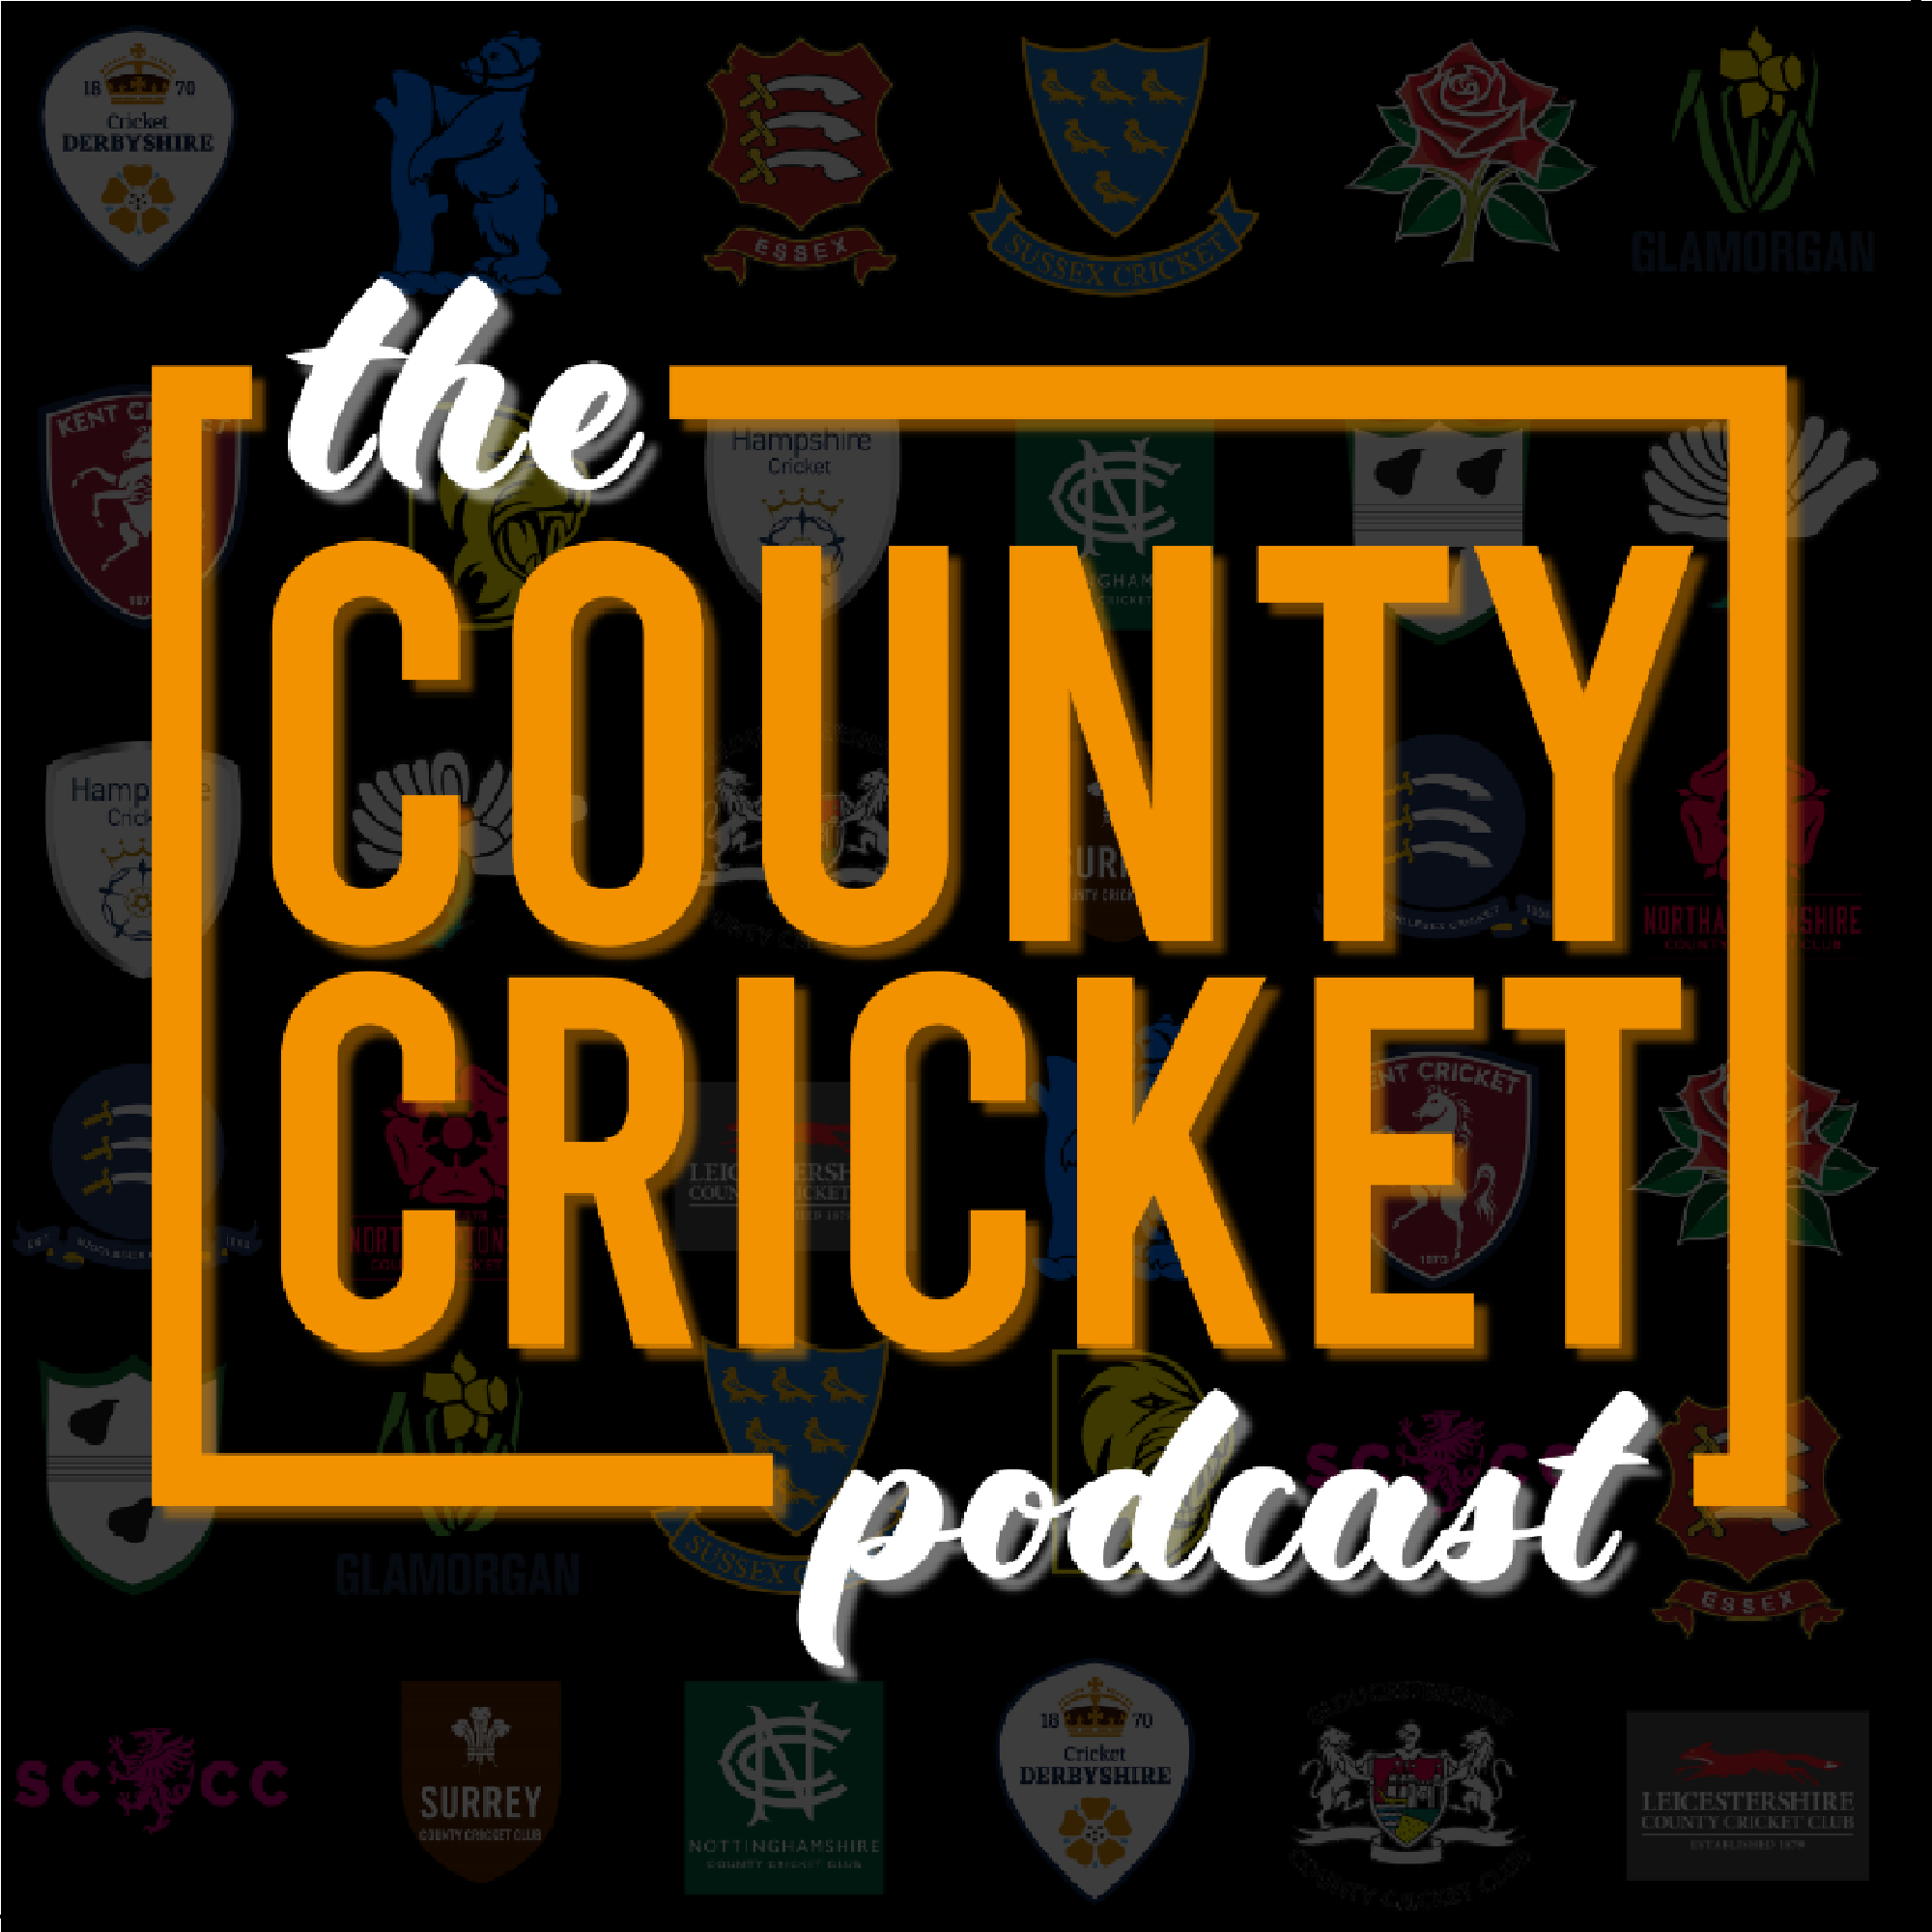 2024 County Championship Round Four Review Show